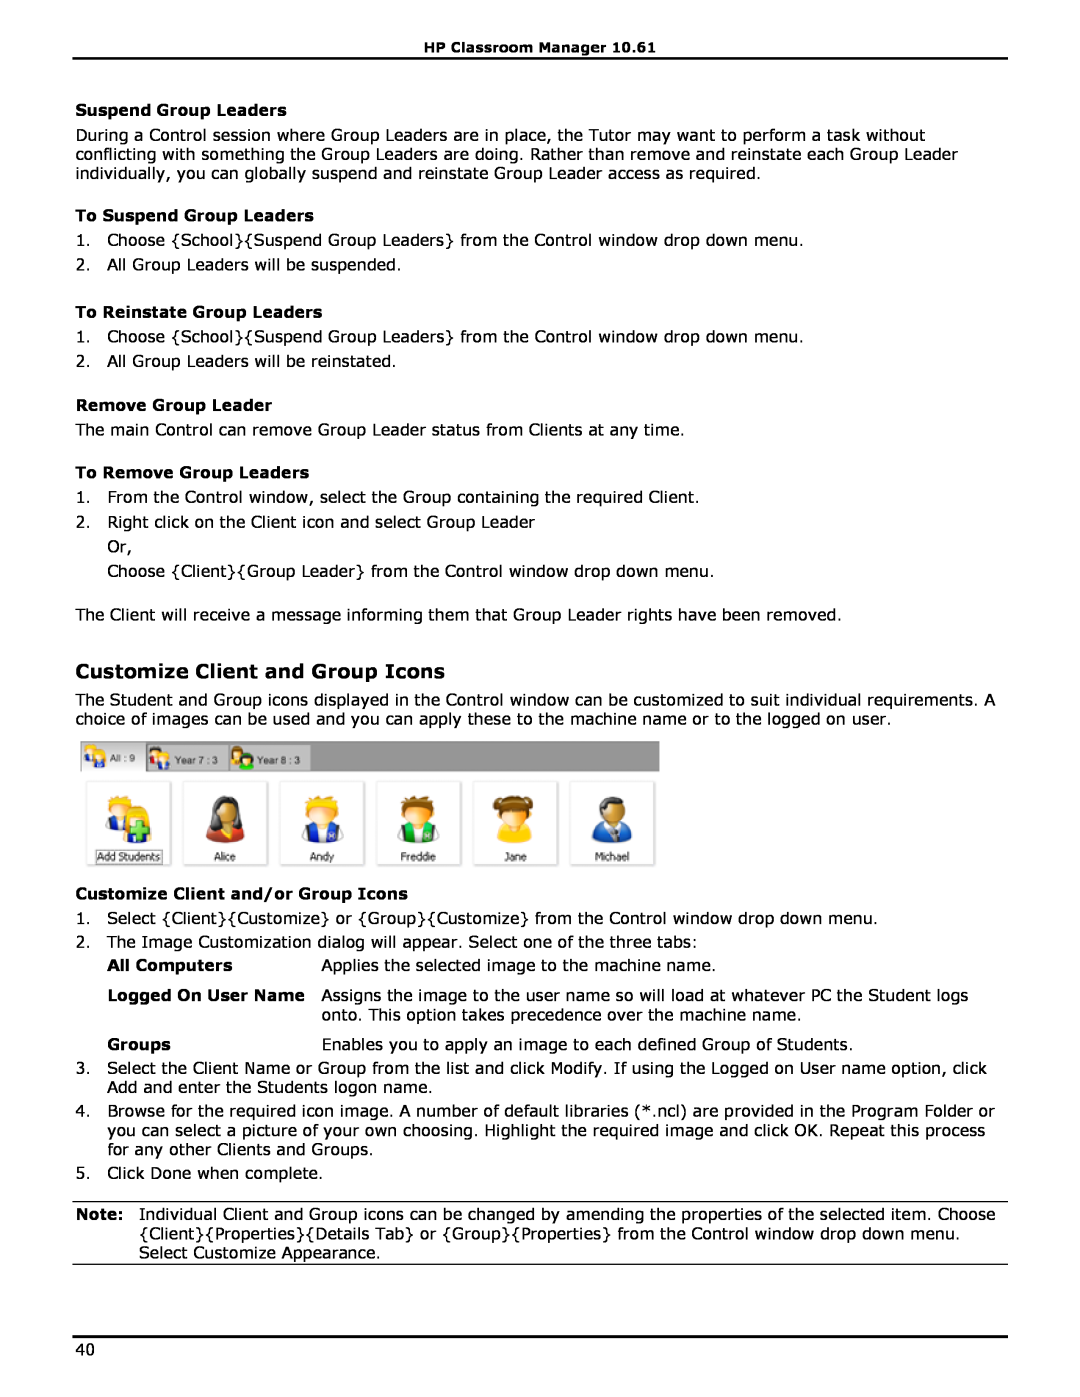 HP Classroom Manager Customize Client and Group Icons, To Suspend Group Leaders, To Reinstate Group Leaders, Groups 